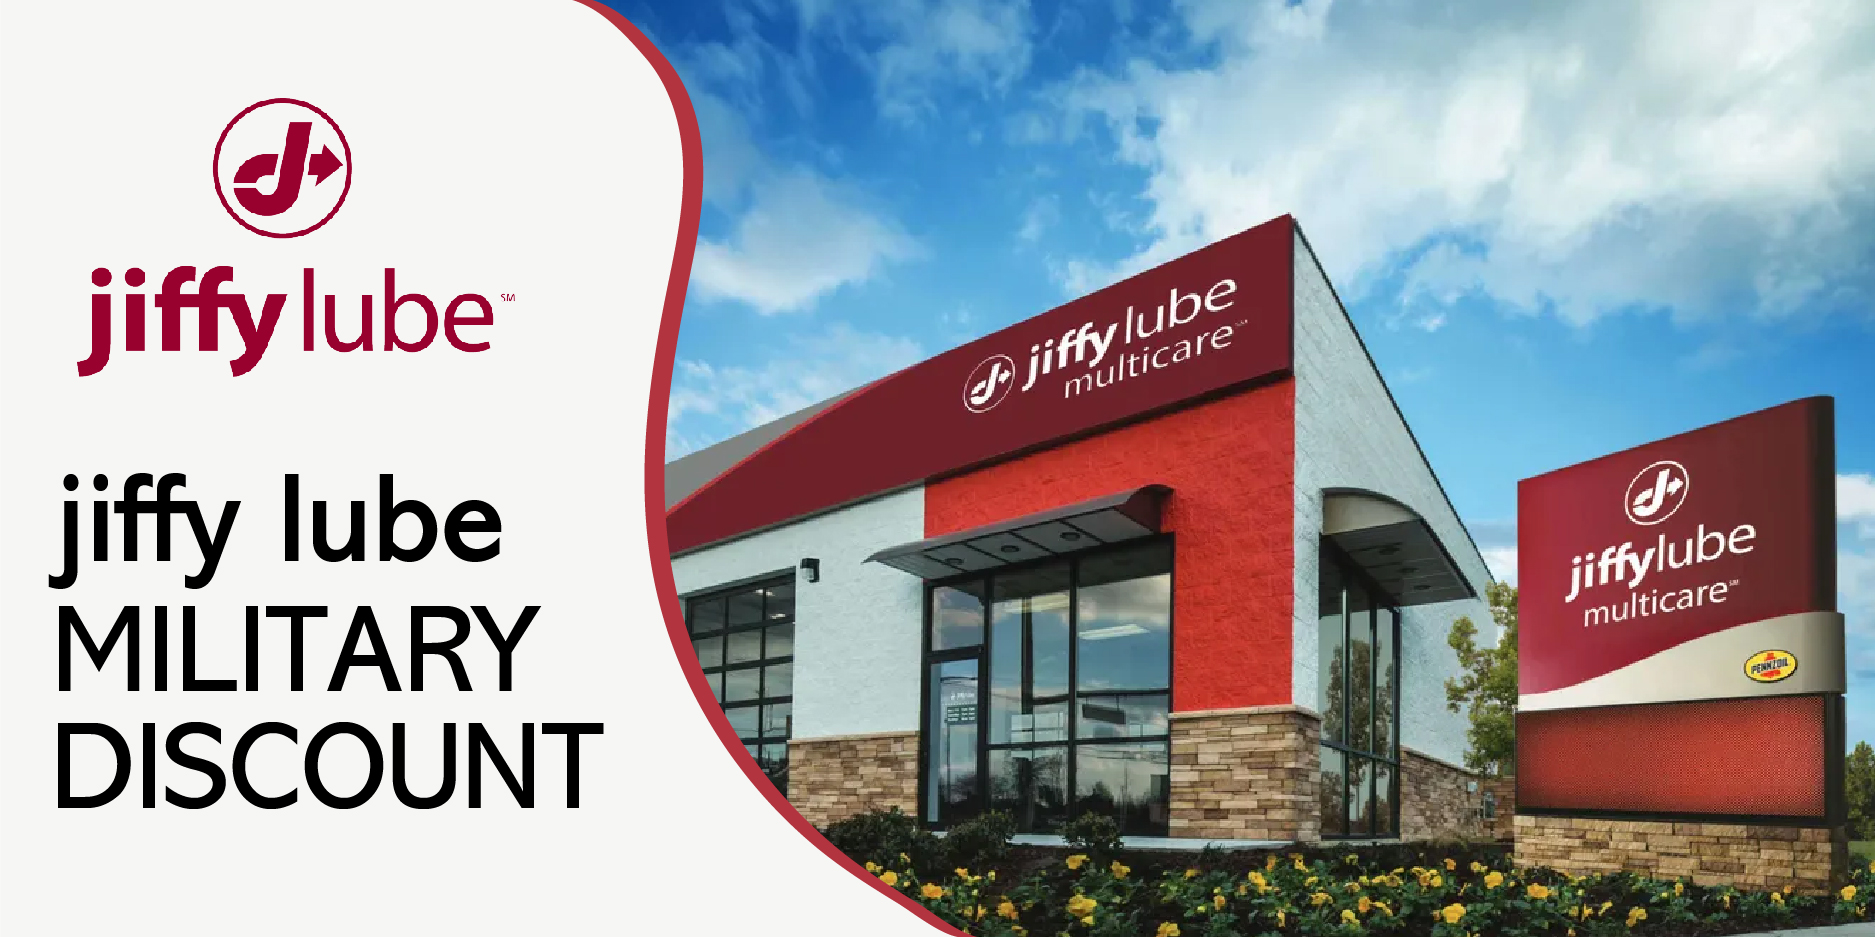 Jiffy Lube Military Discount